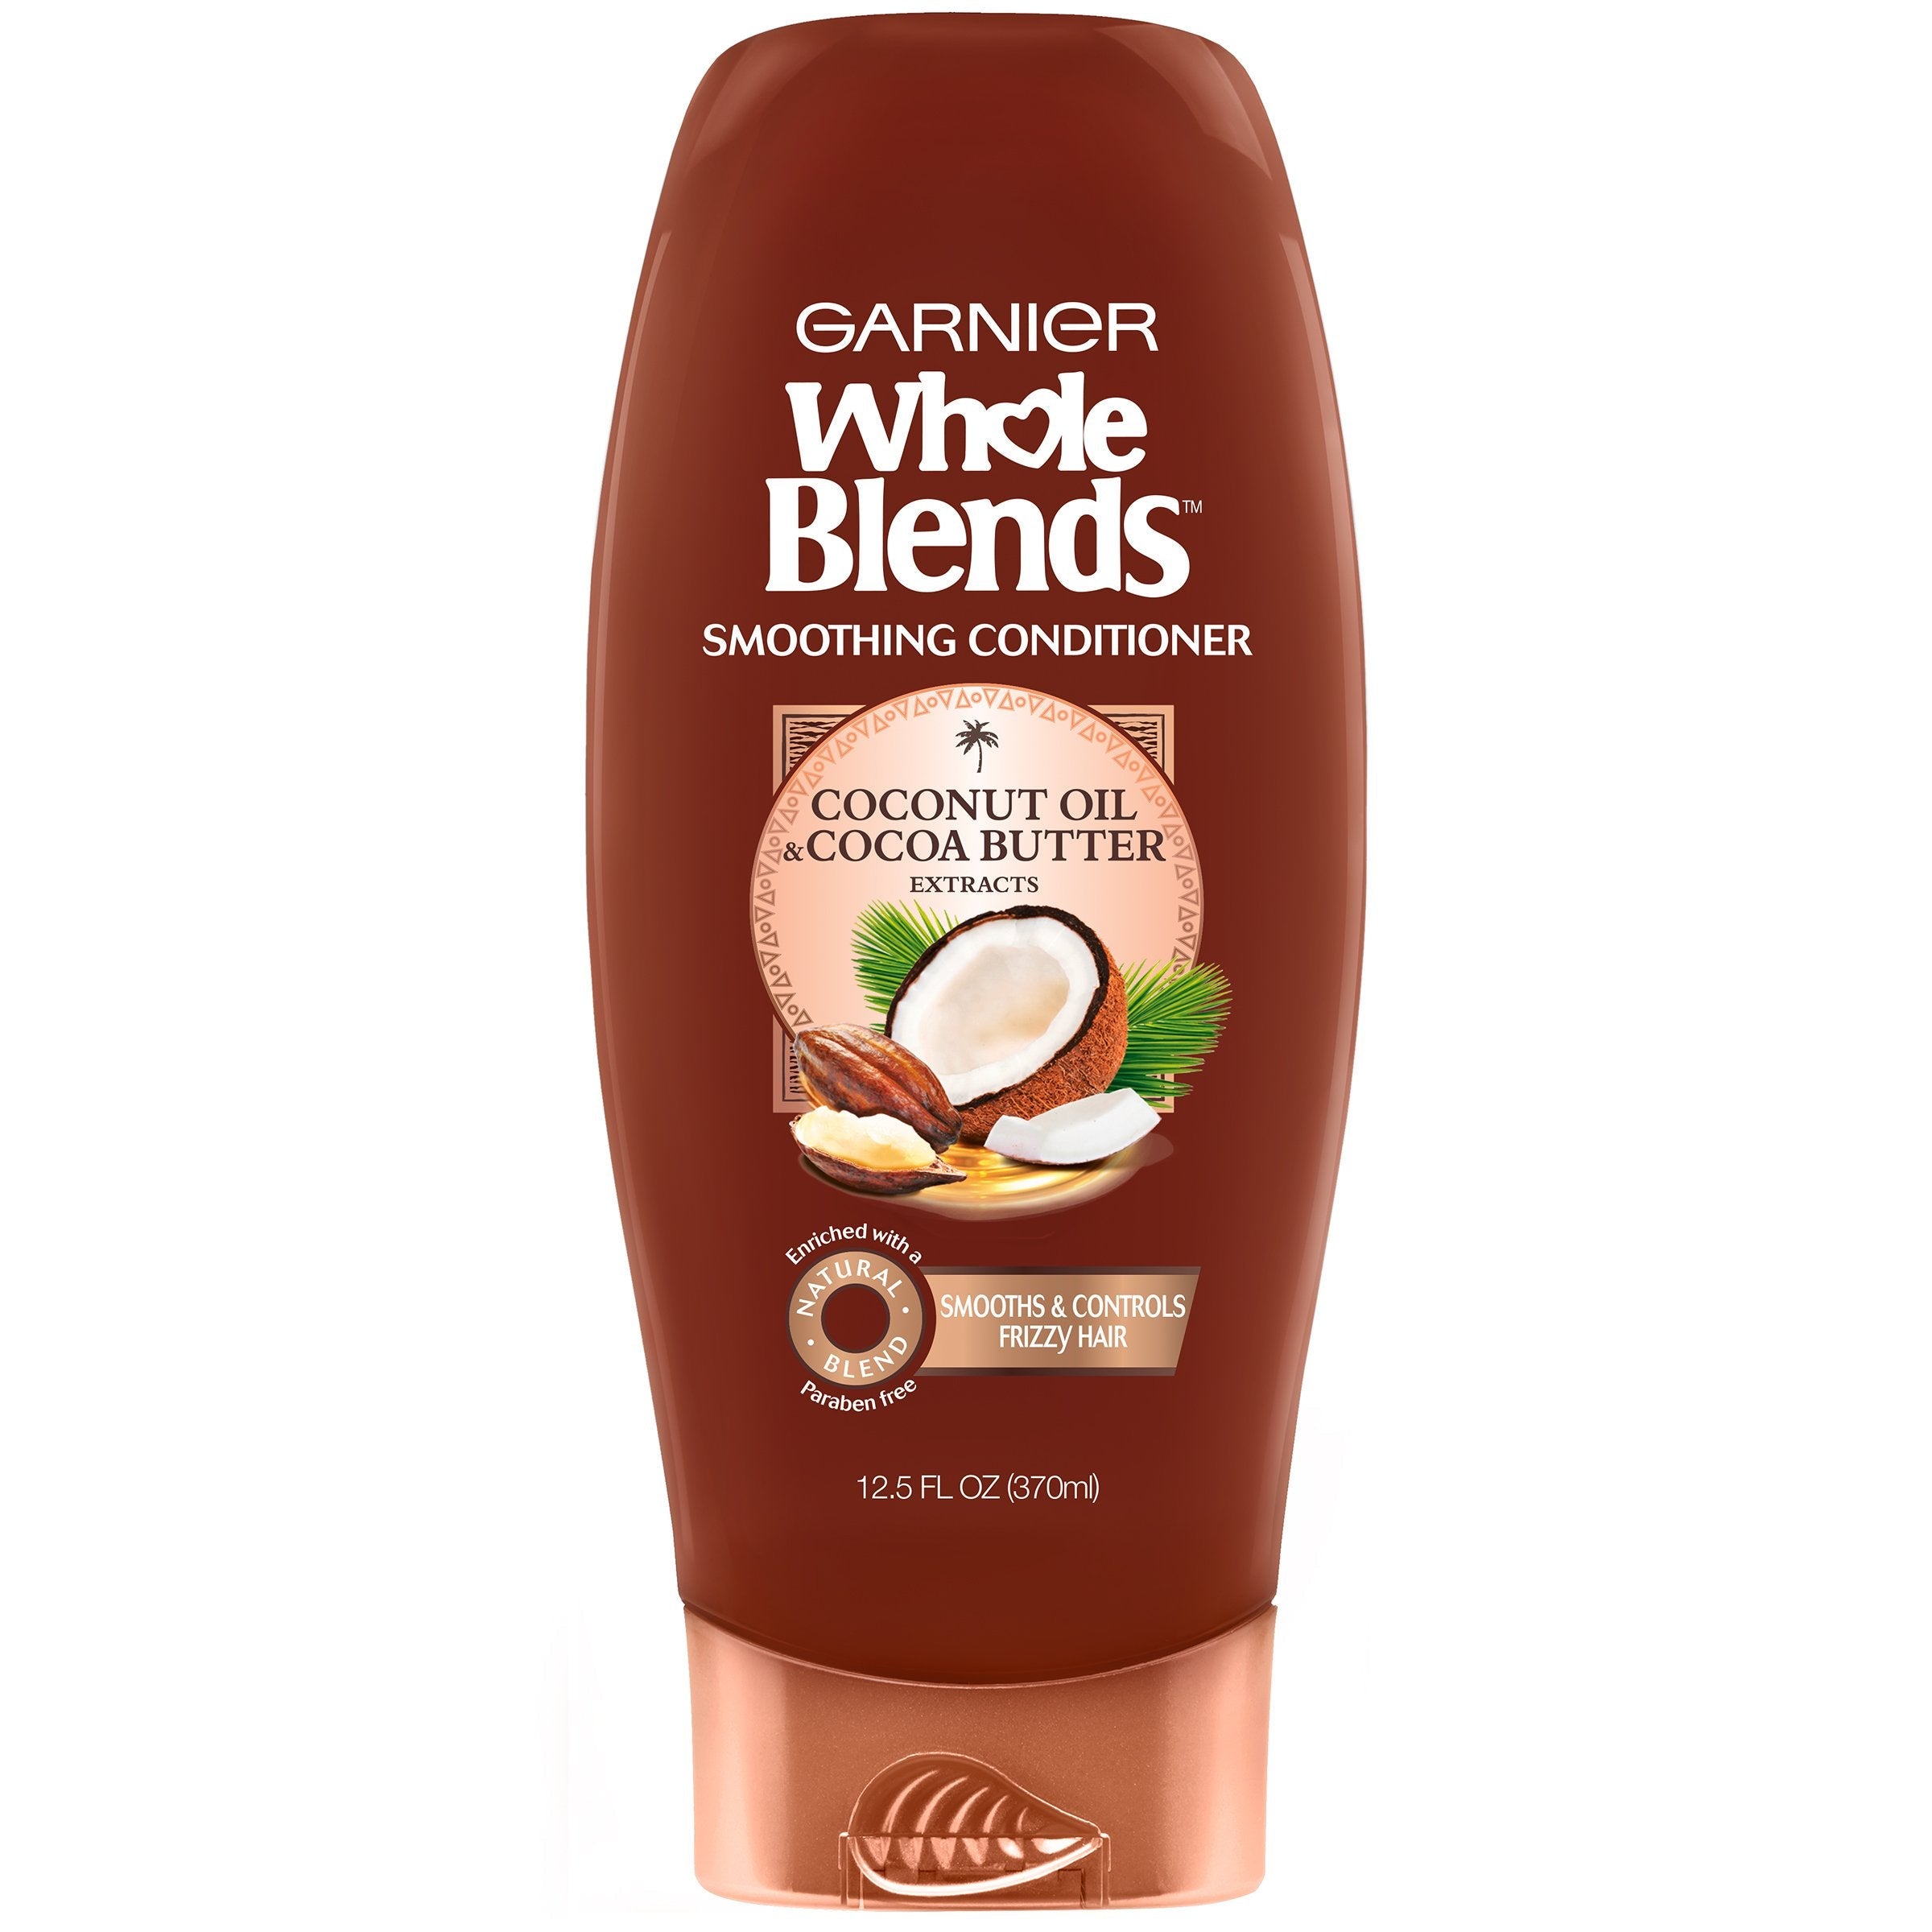 Garnier Whole Blends Smoothing Conditioner Coconut Oil & Cocoa Butter Extract, 12.5 fl. oz.-CaribOnline